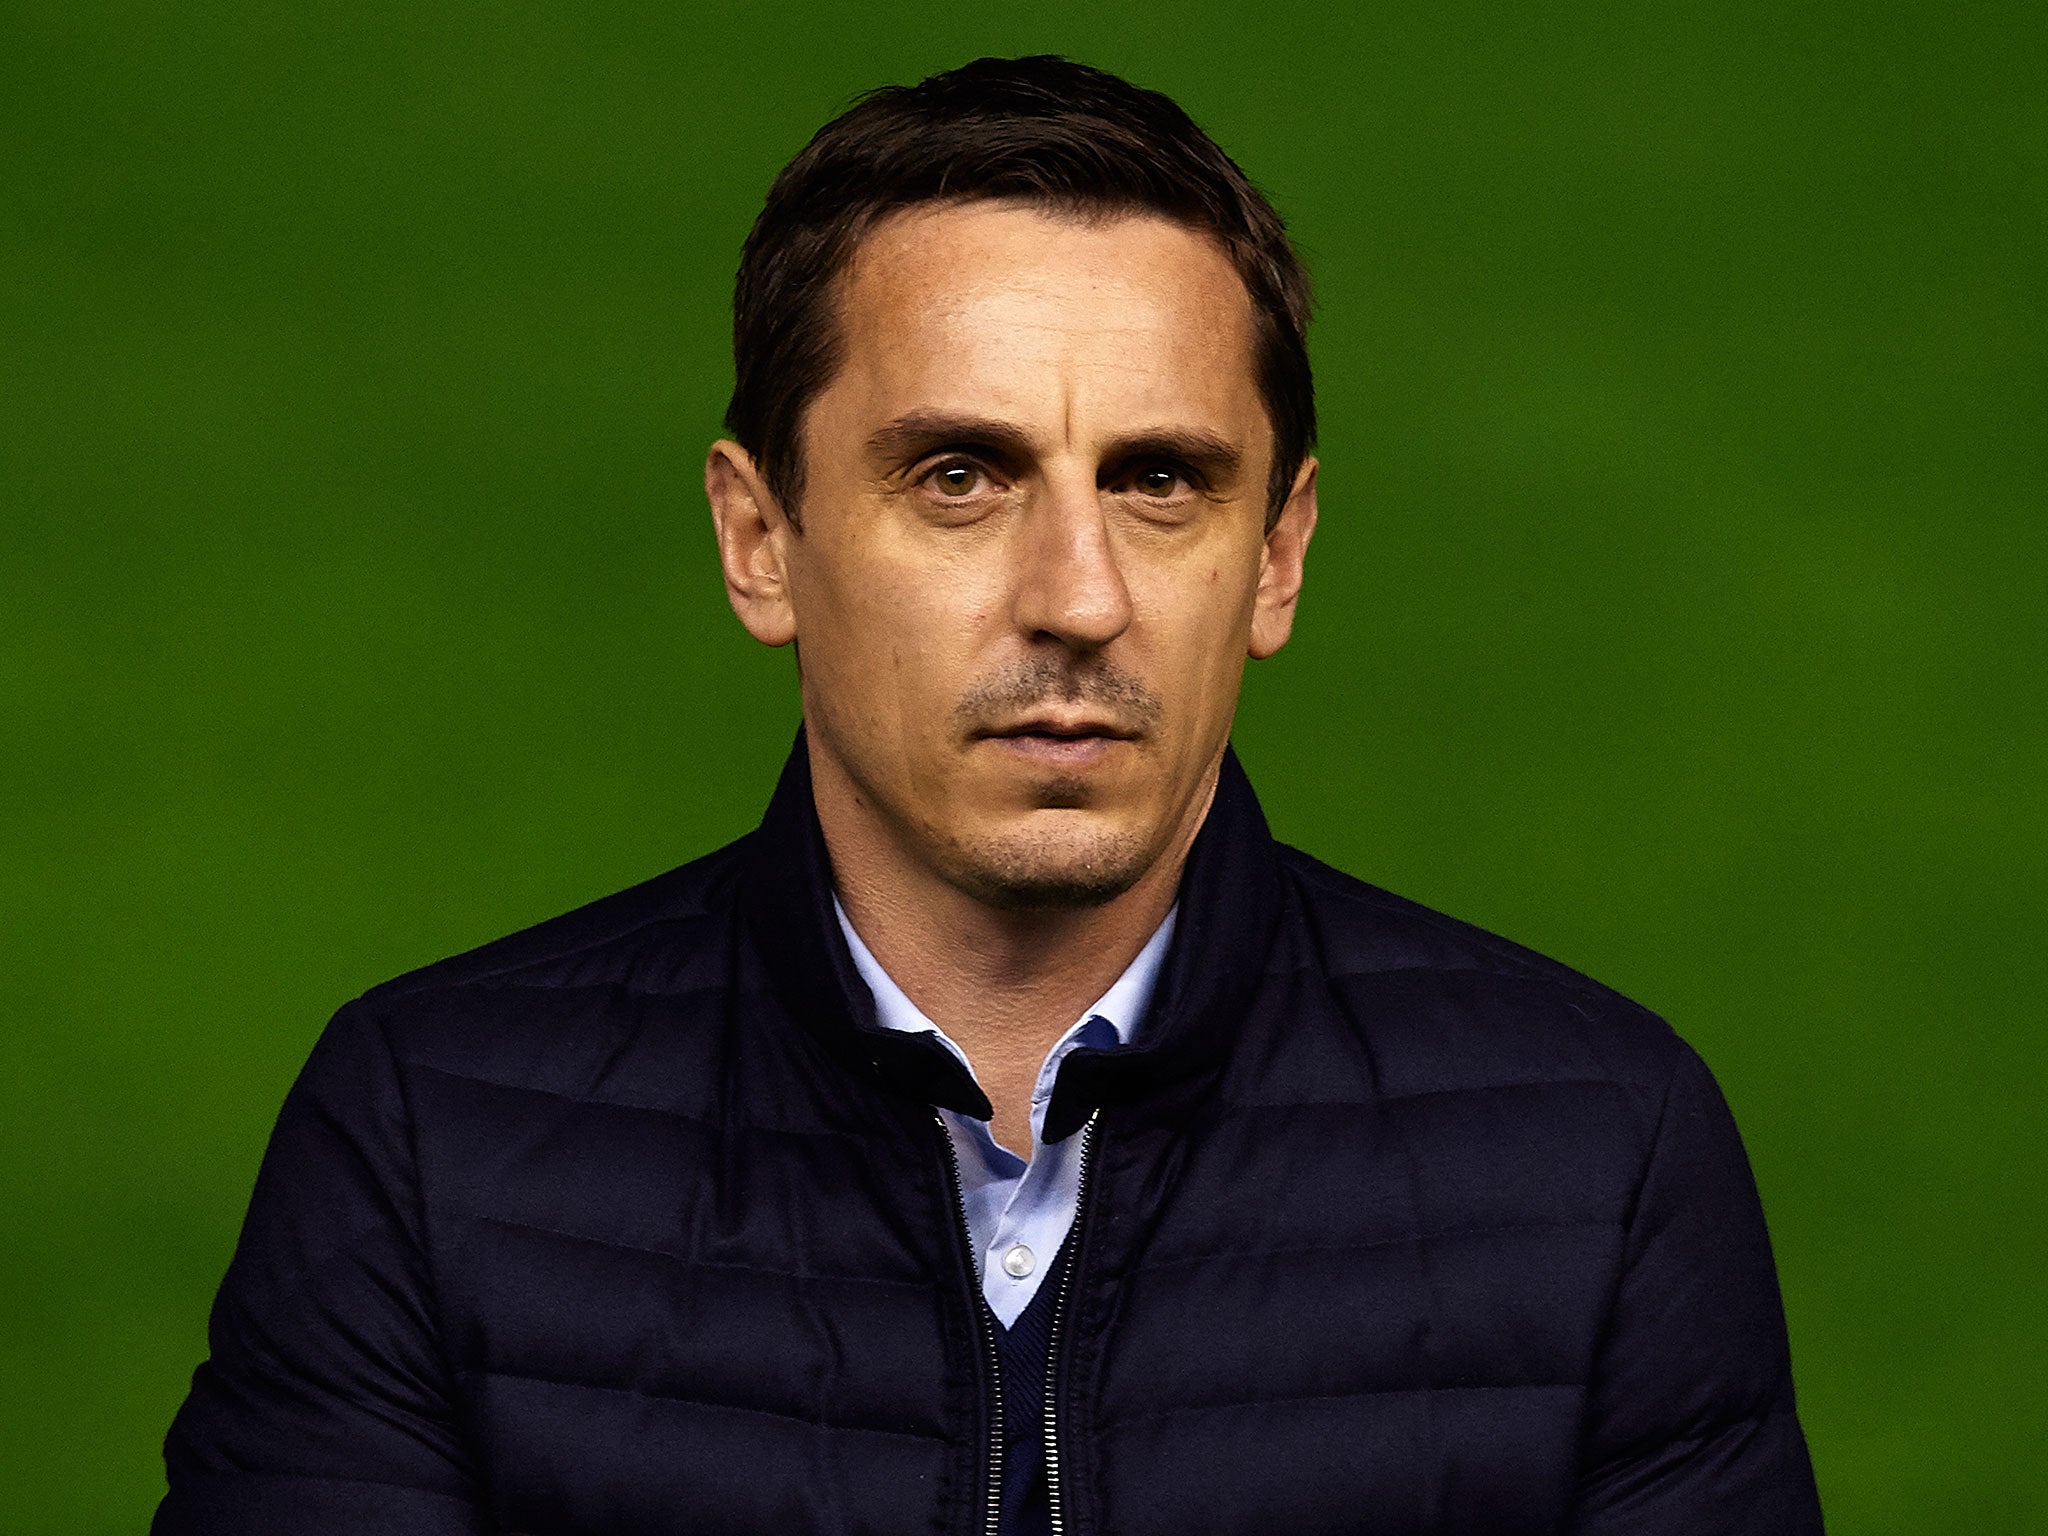 Gary Neville believes Manchester United are missing something from their midfield